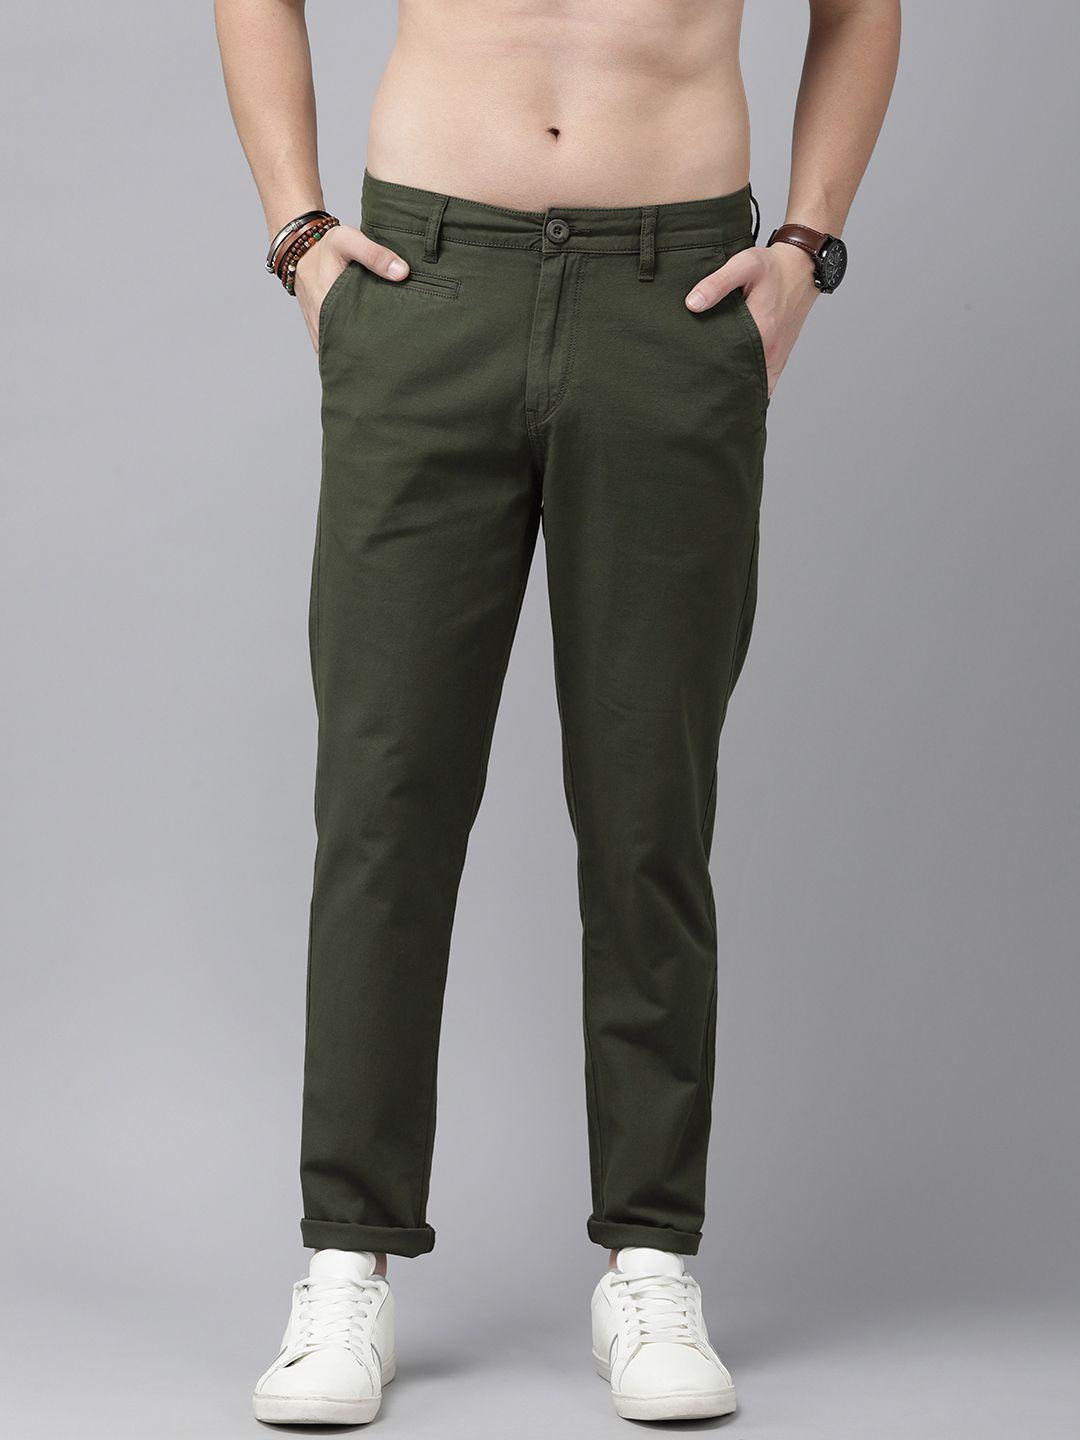 the roadster life co. men chinos trousers